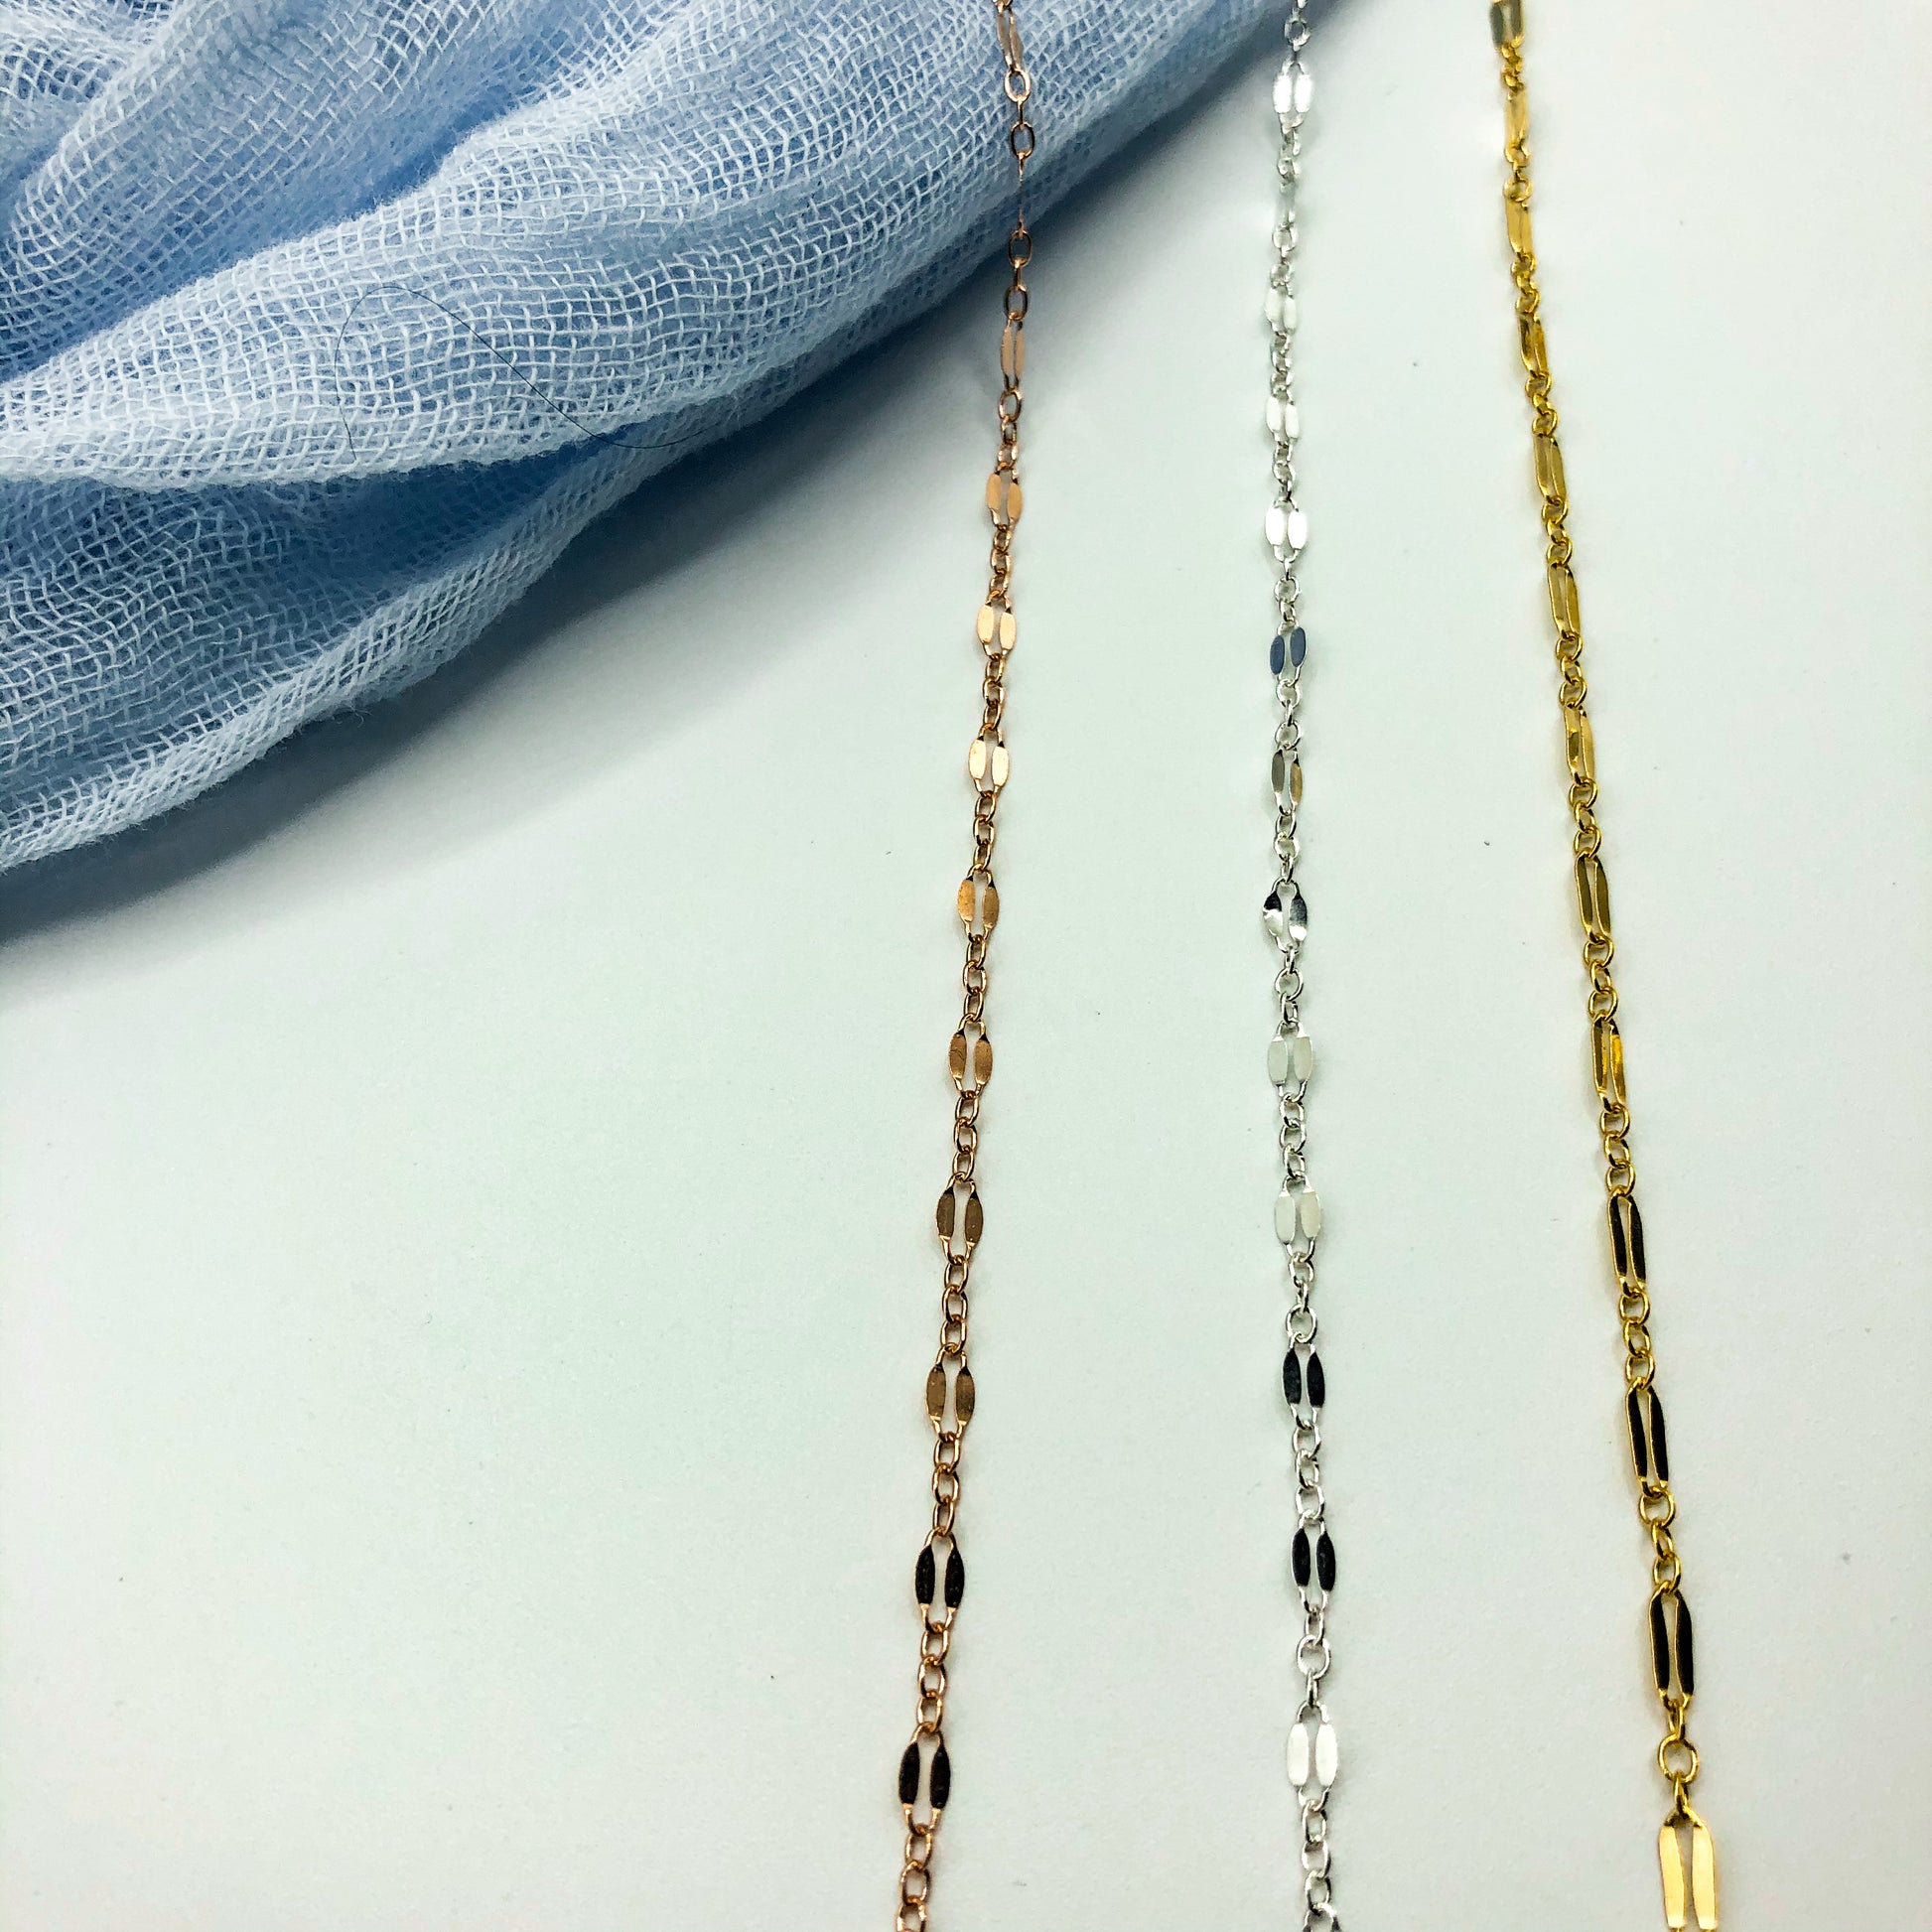 Sunrise Chain Necklace - Blue Sky Feathers